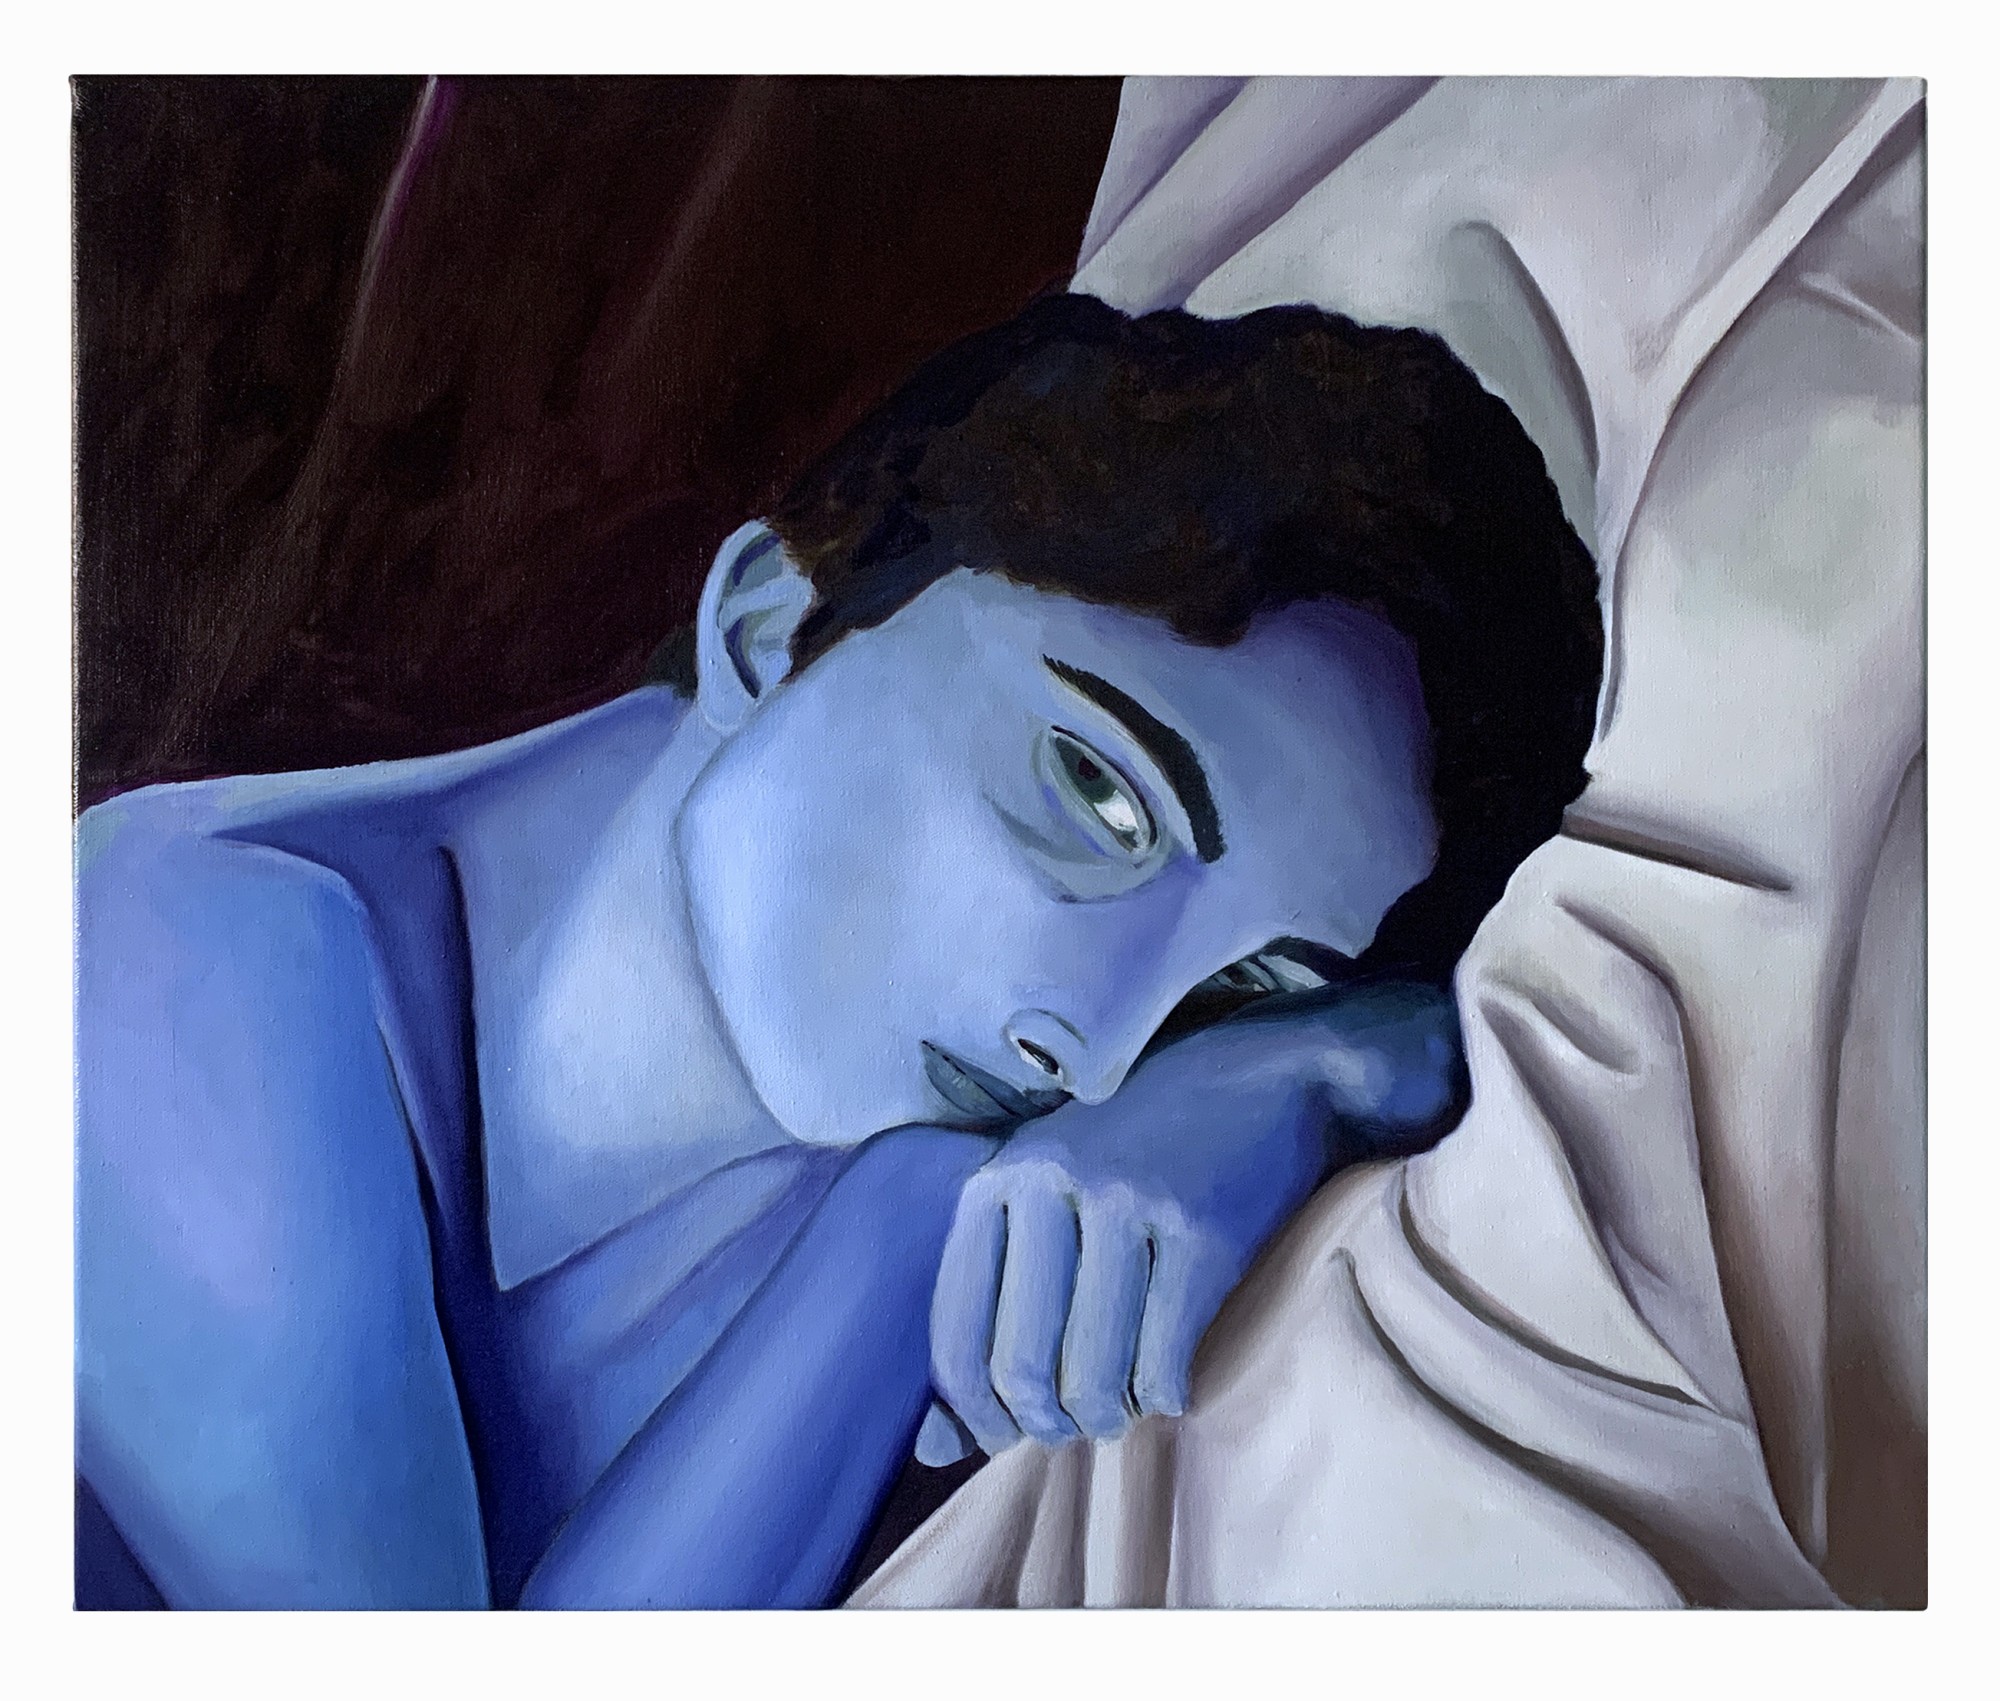 In this painted self-portrait, Eli Hill reclines on a white sheet with their face on their hands, their skin painted blue